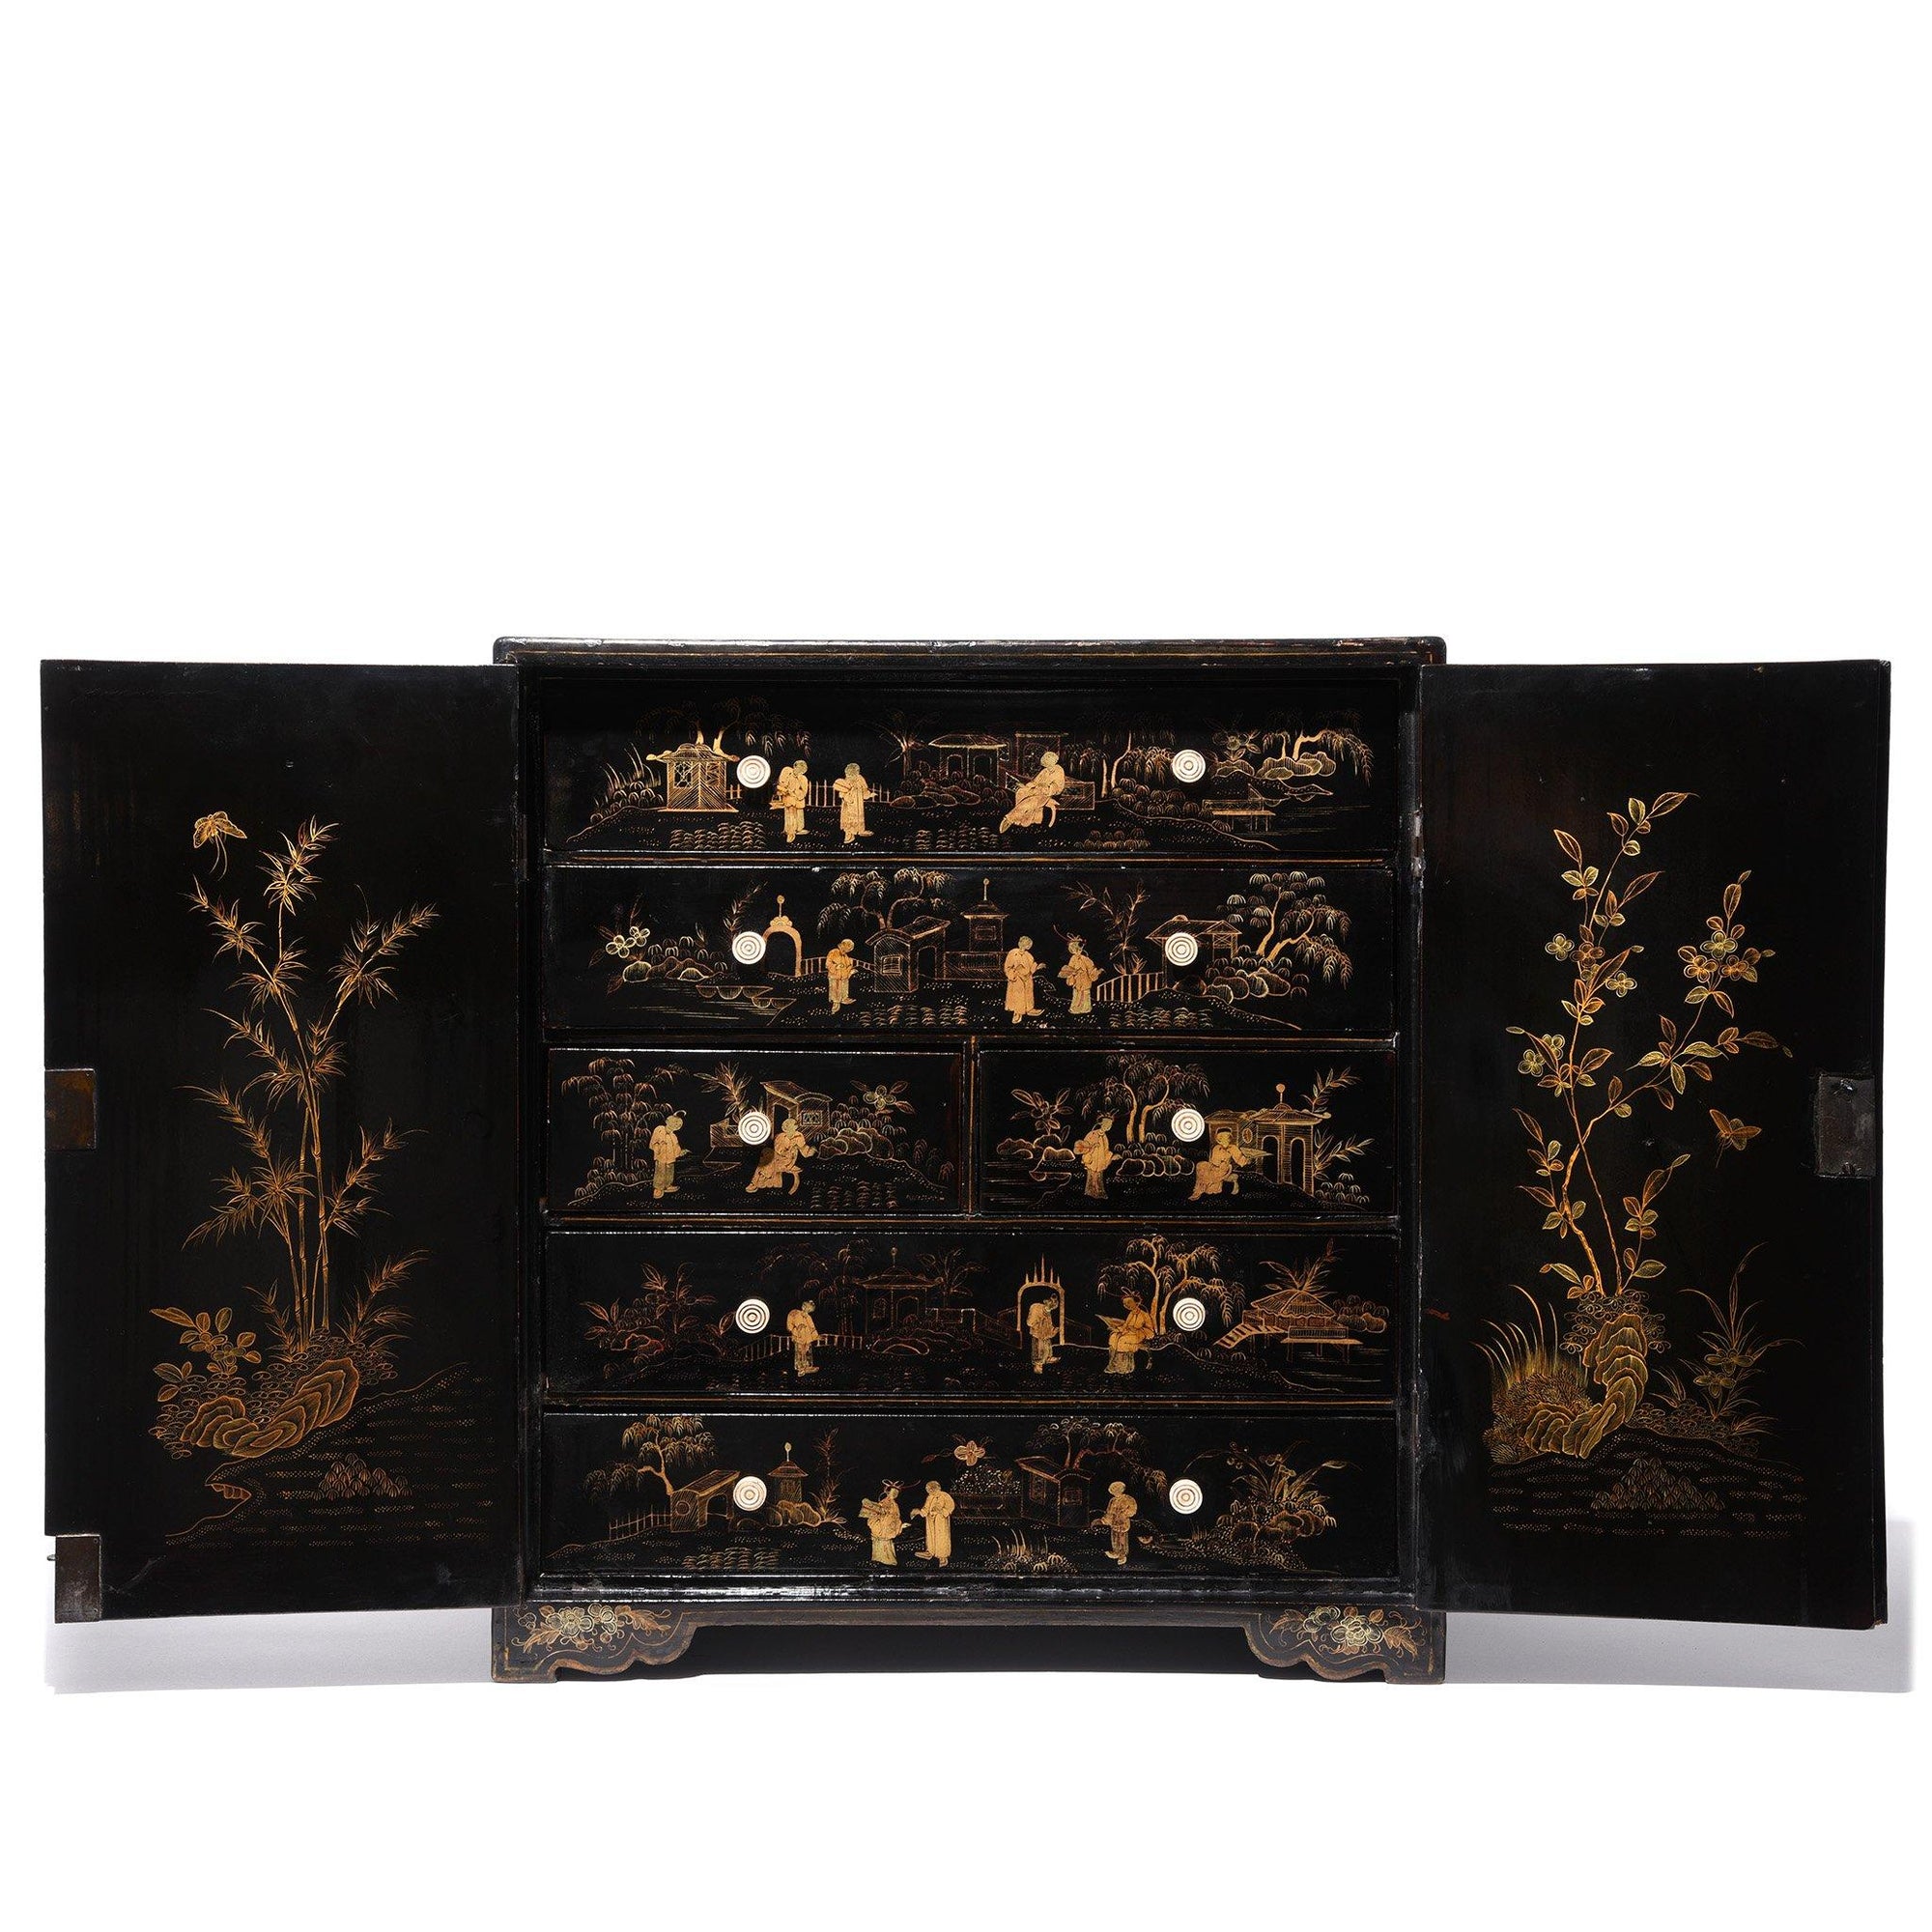 Chinese Export Gilt Black Lacquer Jewellery Table Cabinet - Early 19thC | Indigo Antiques